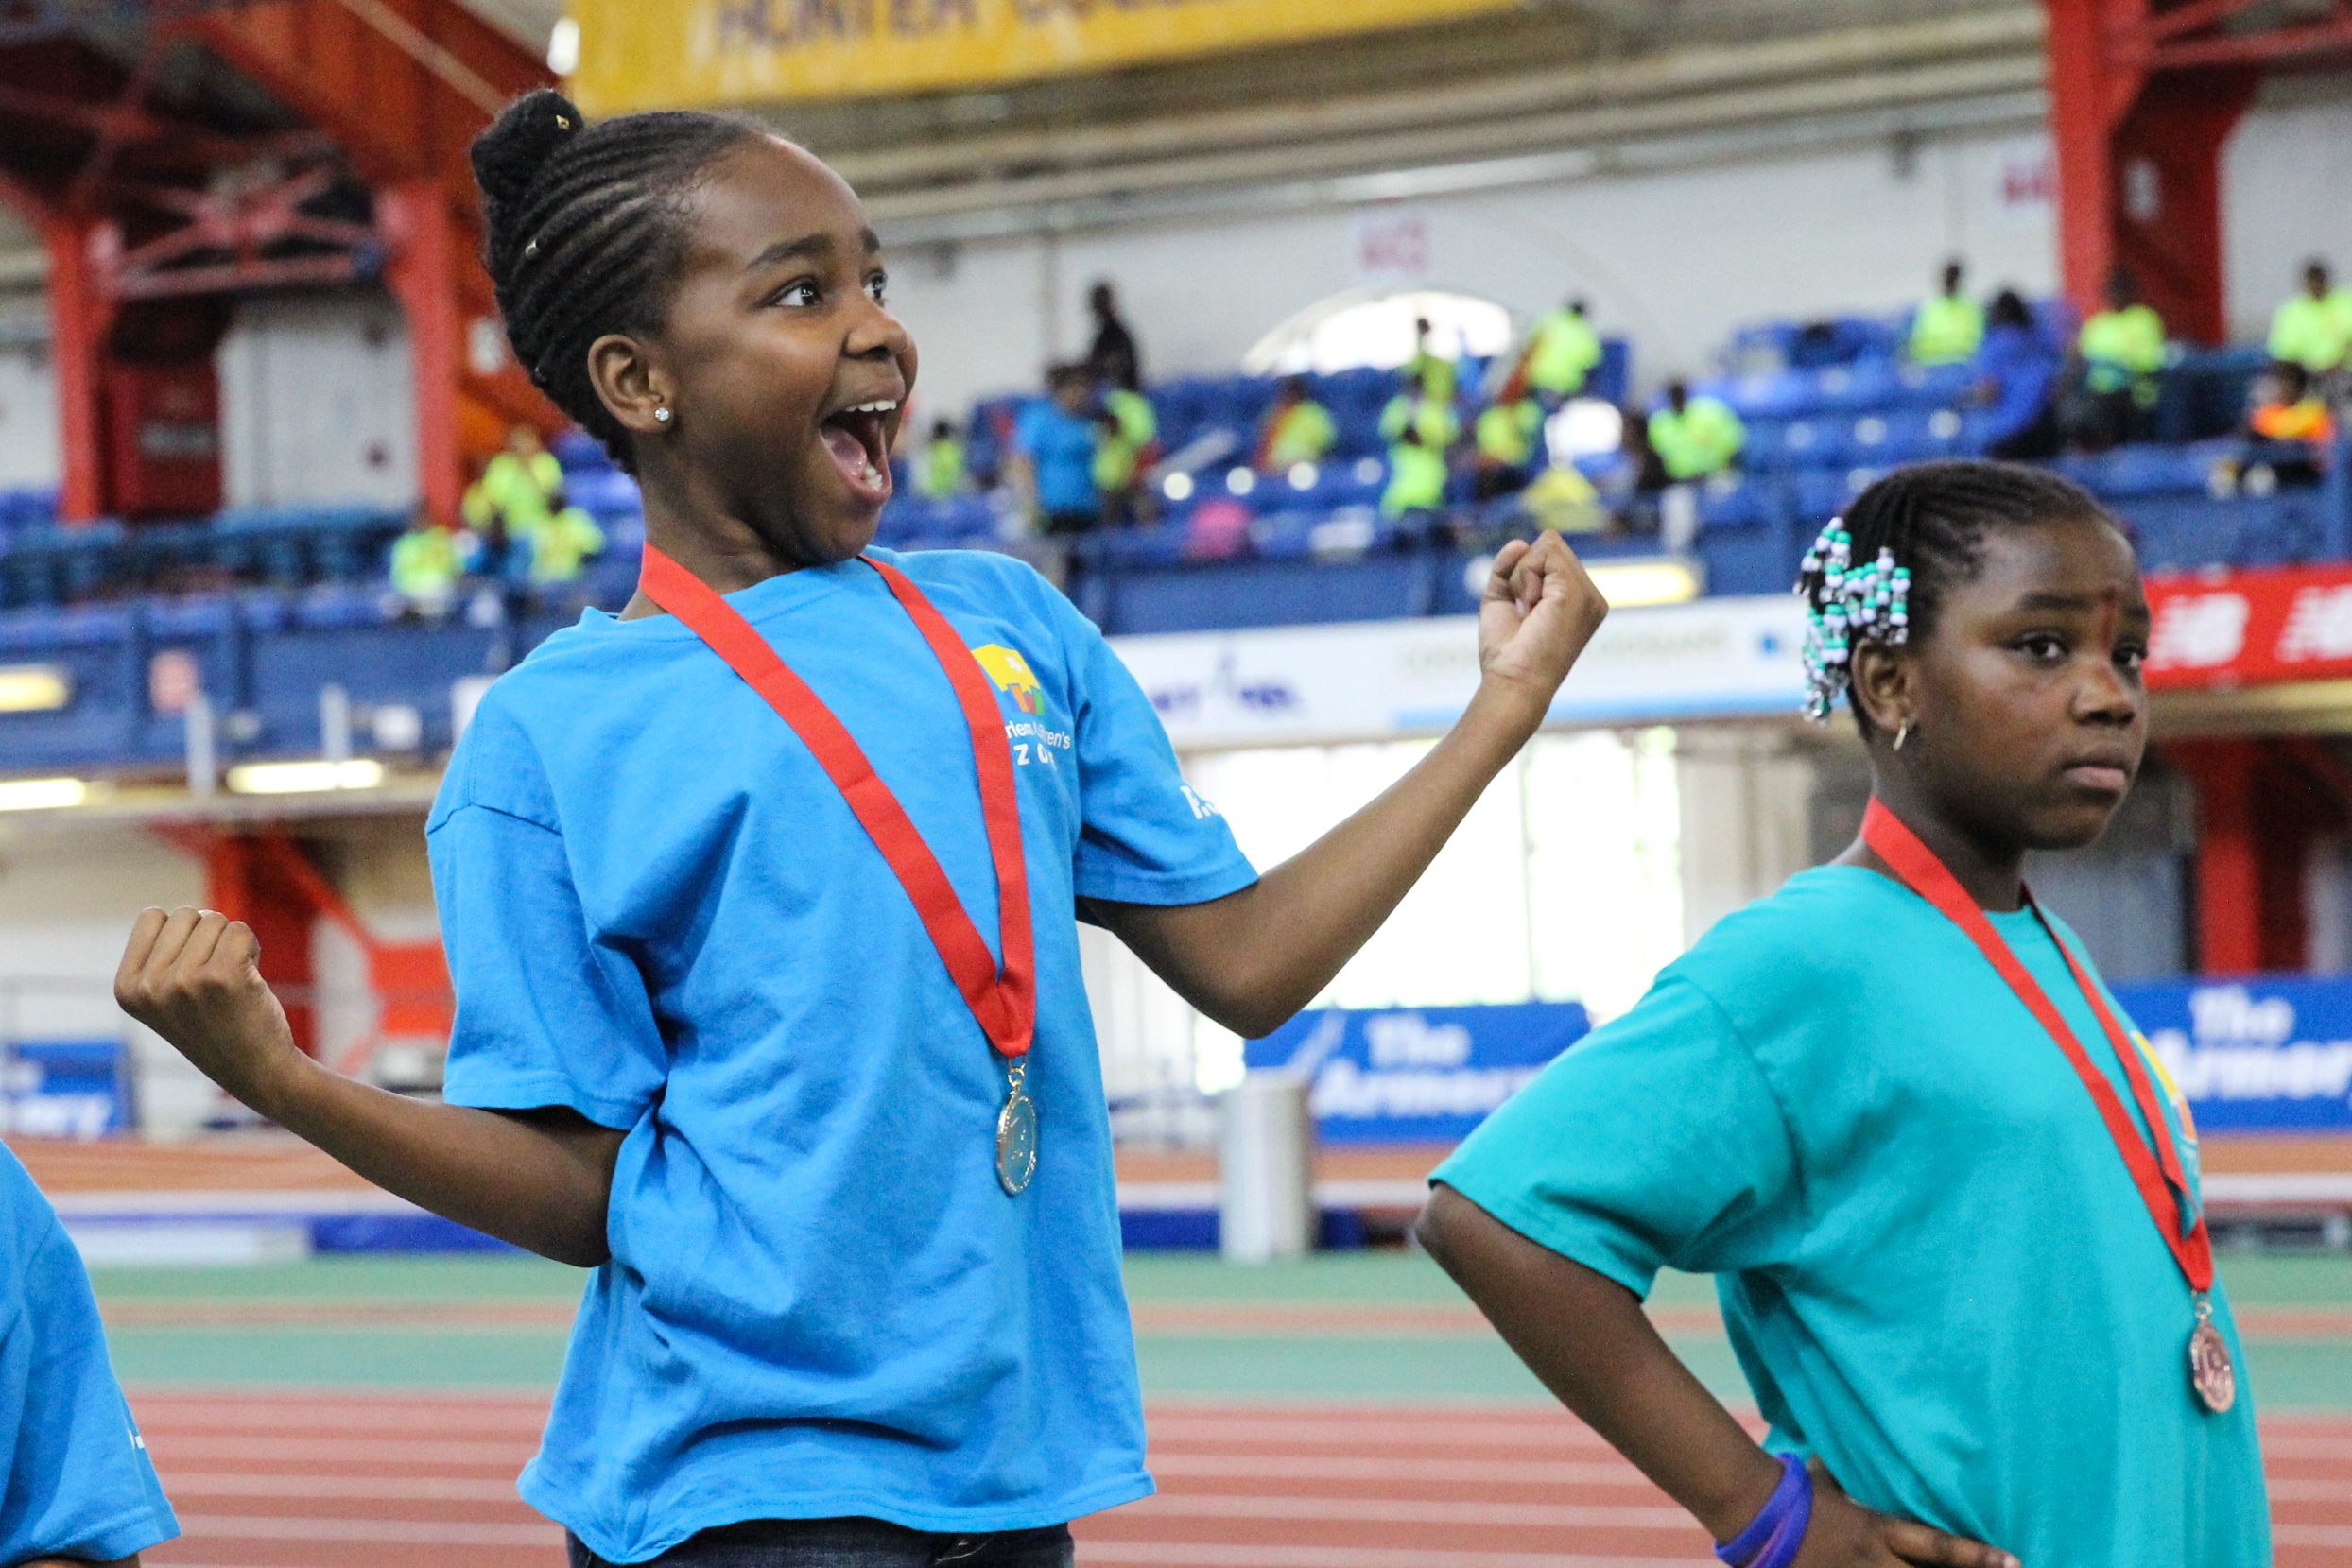 Young girl smiling with medal on track.